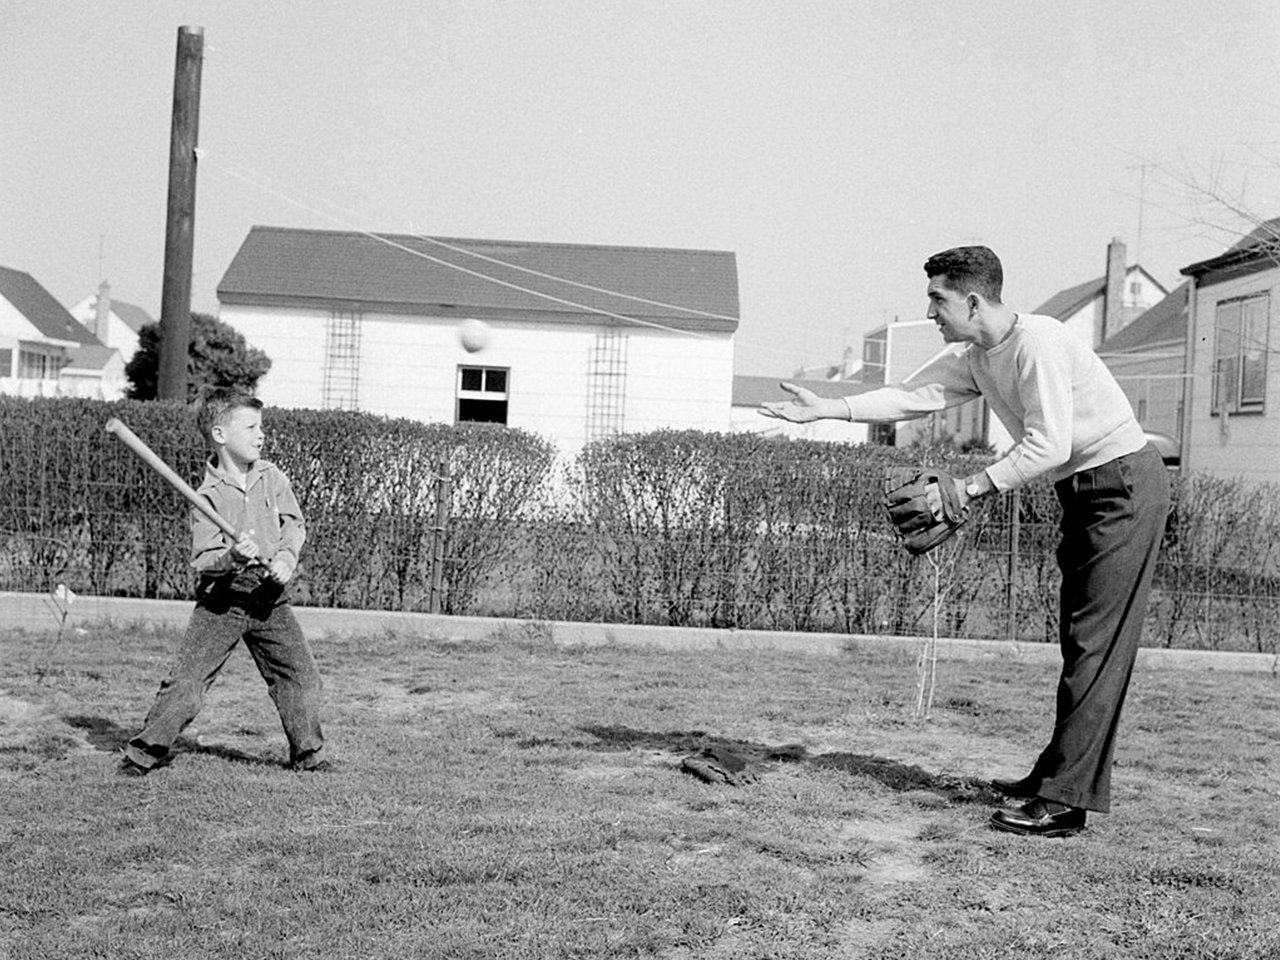 Vintage photo of dad and son playing catch. Father's Day is old-fashioned and needs to die, our writer argues